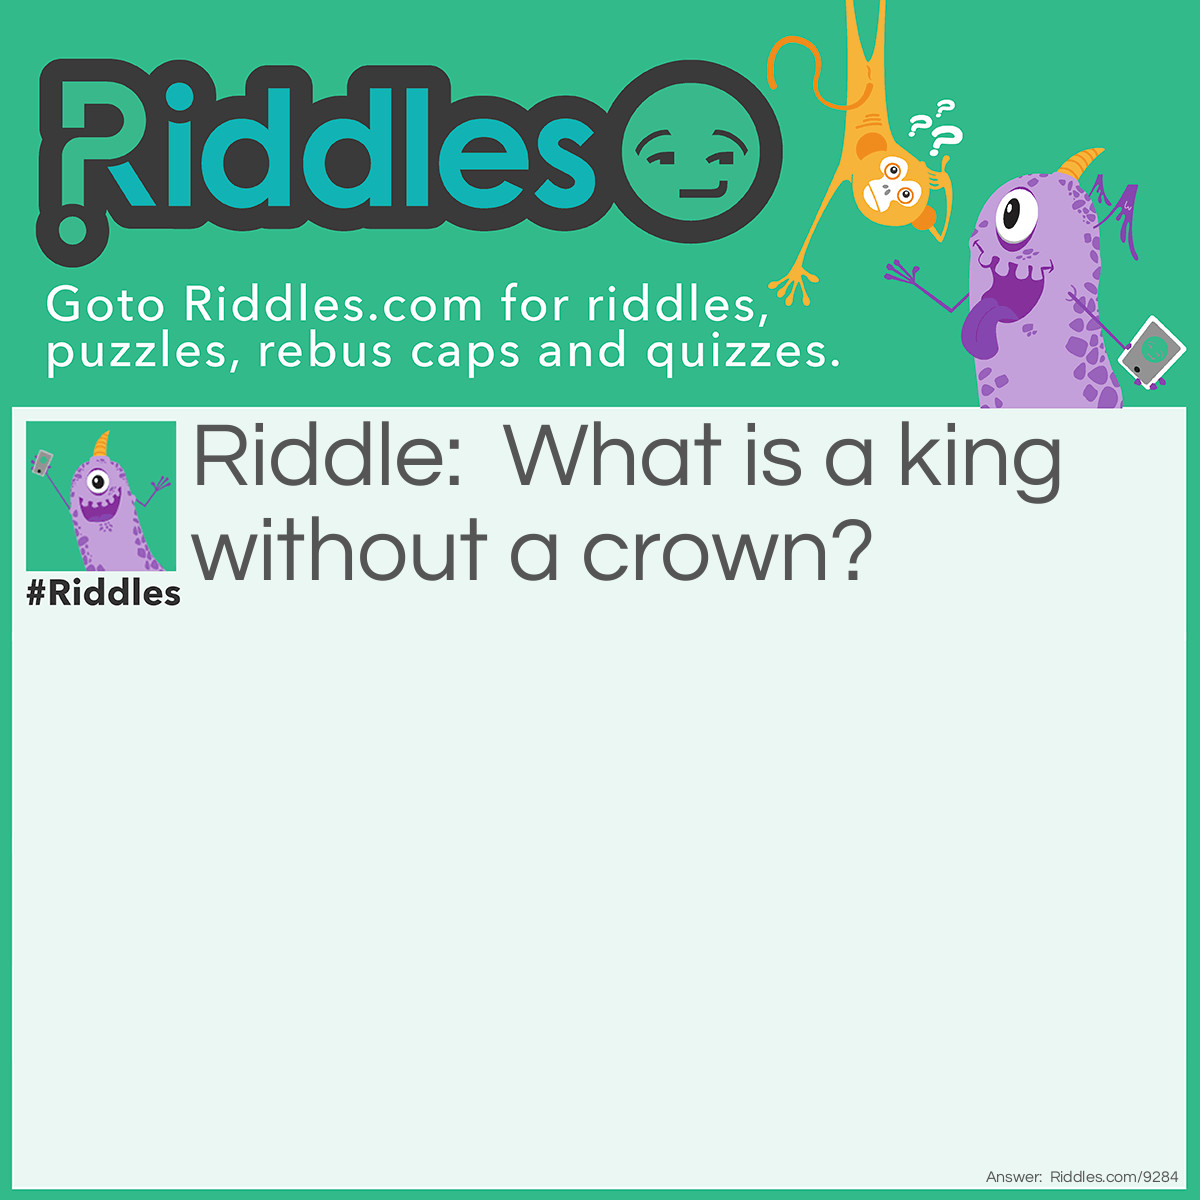 Riddle: What is a king without a crown? Answer: Lion.